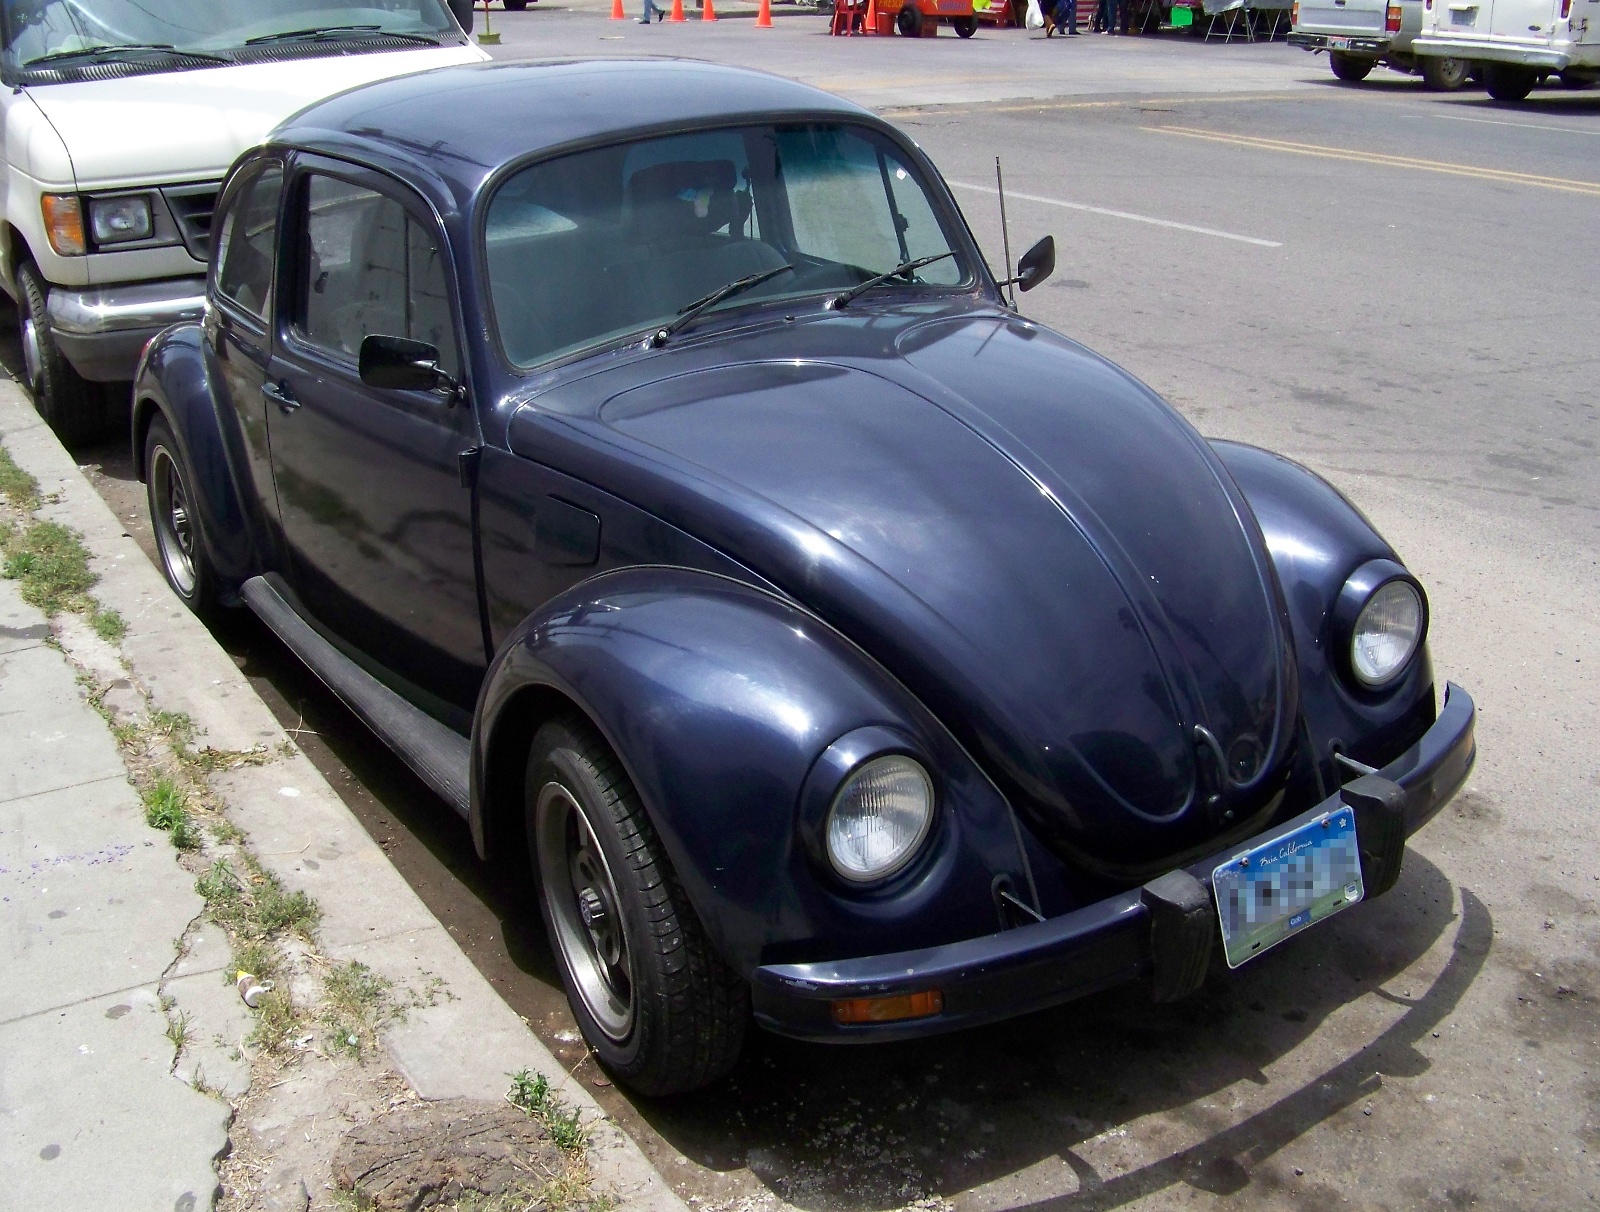 One of many Mexican VWs that I saw and photographed.